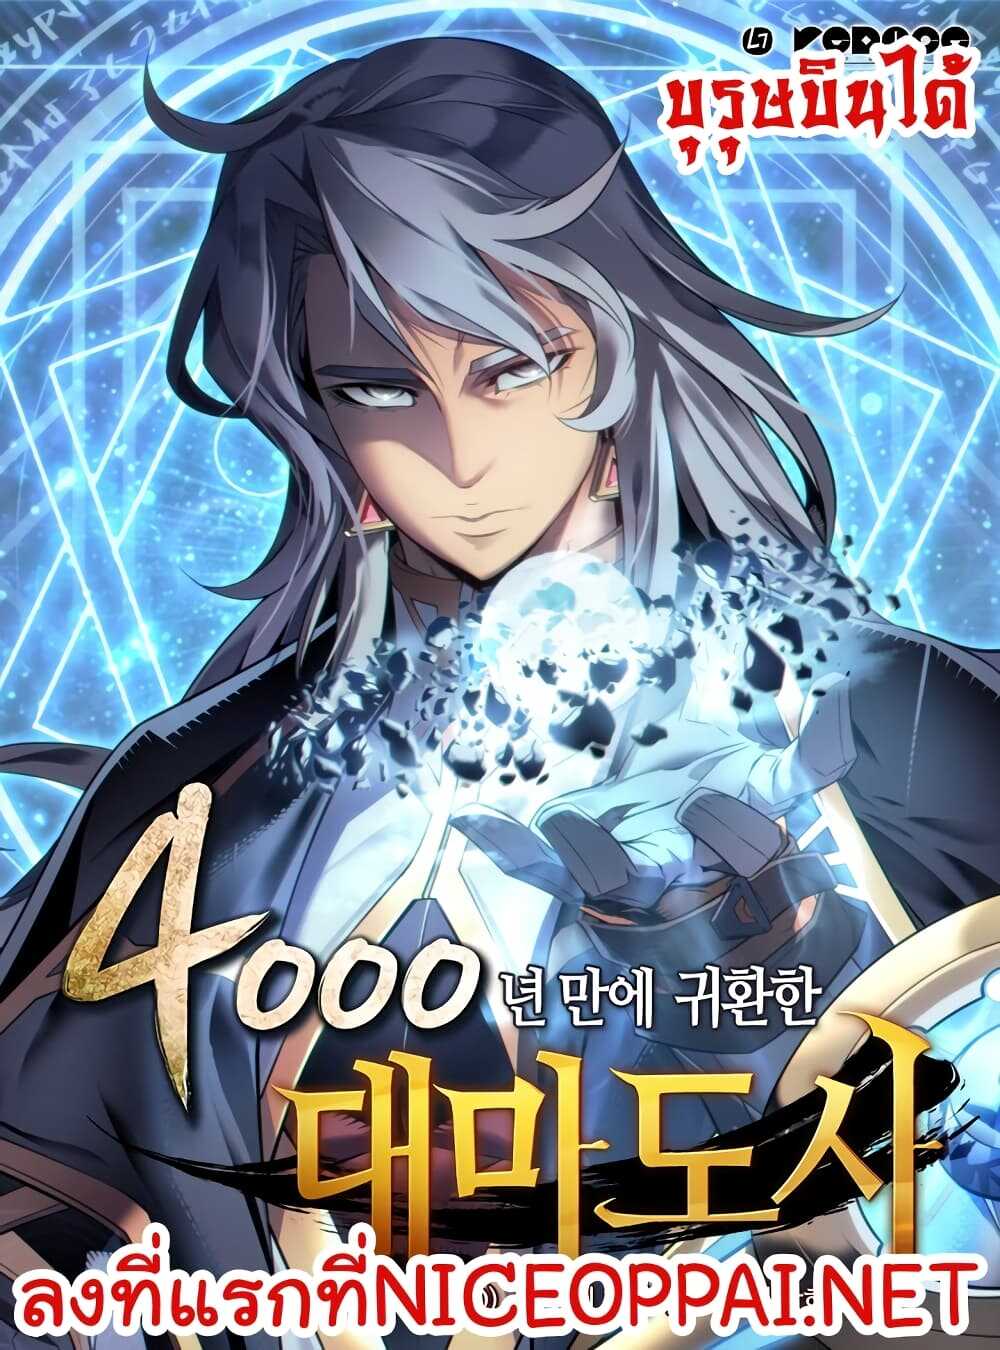 The Great Mage Returns After 4000 Years 28 (1)